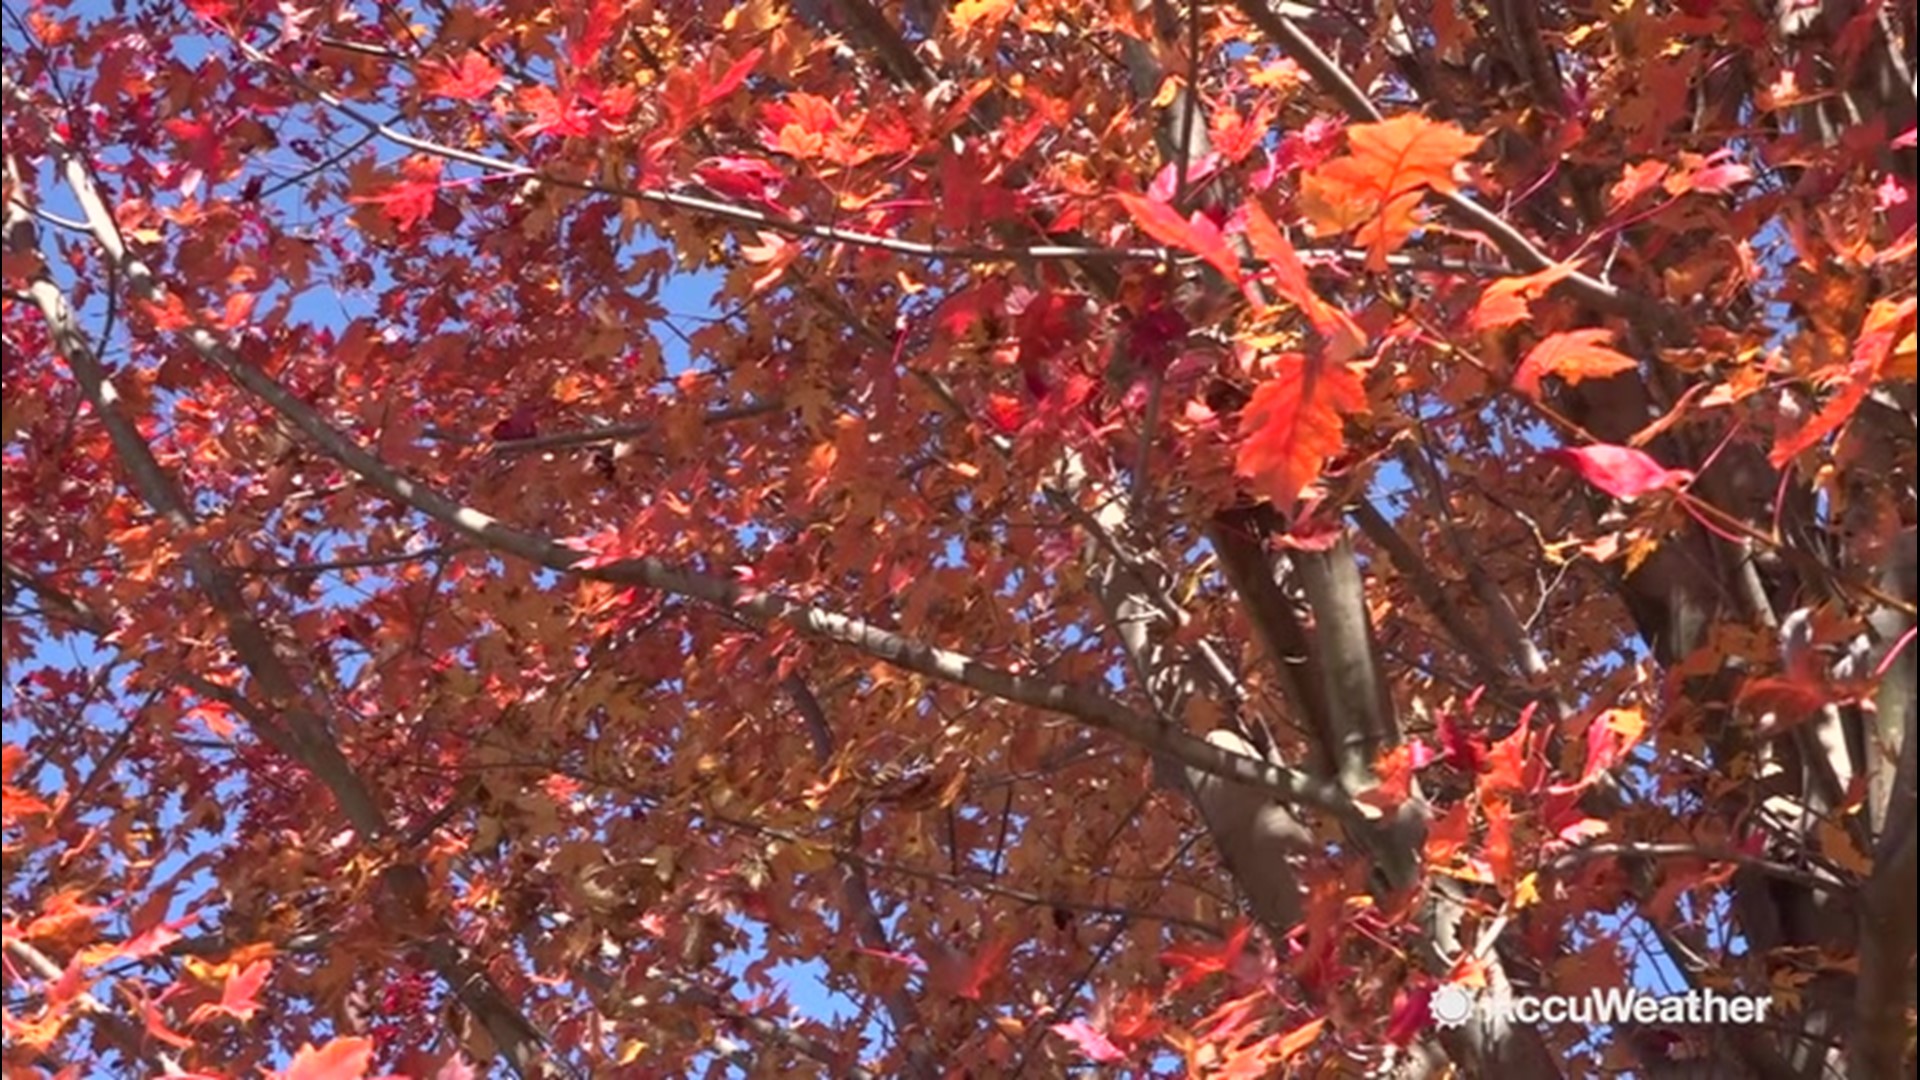 AccuWeather meteorologist Lauren Rainson spoke with Penn State's Marc Abrams, professor of Forest Ecology and Tree Physiology on how recent drought conditions impacted peak fall foliage this season.